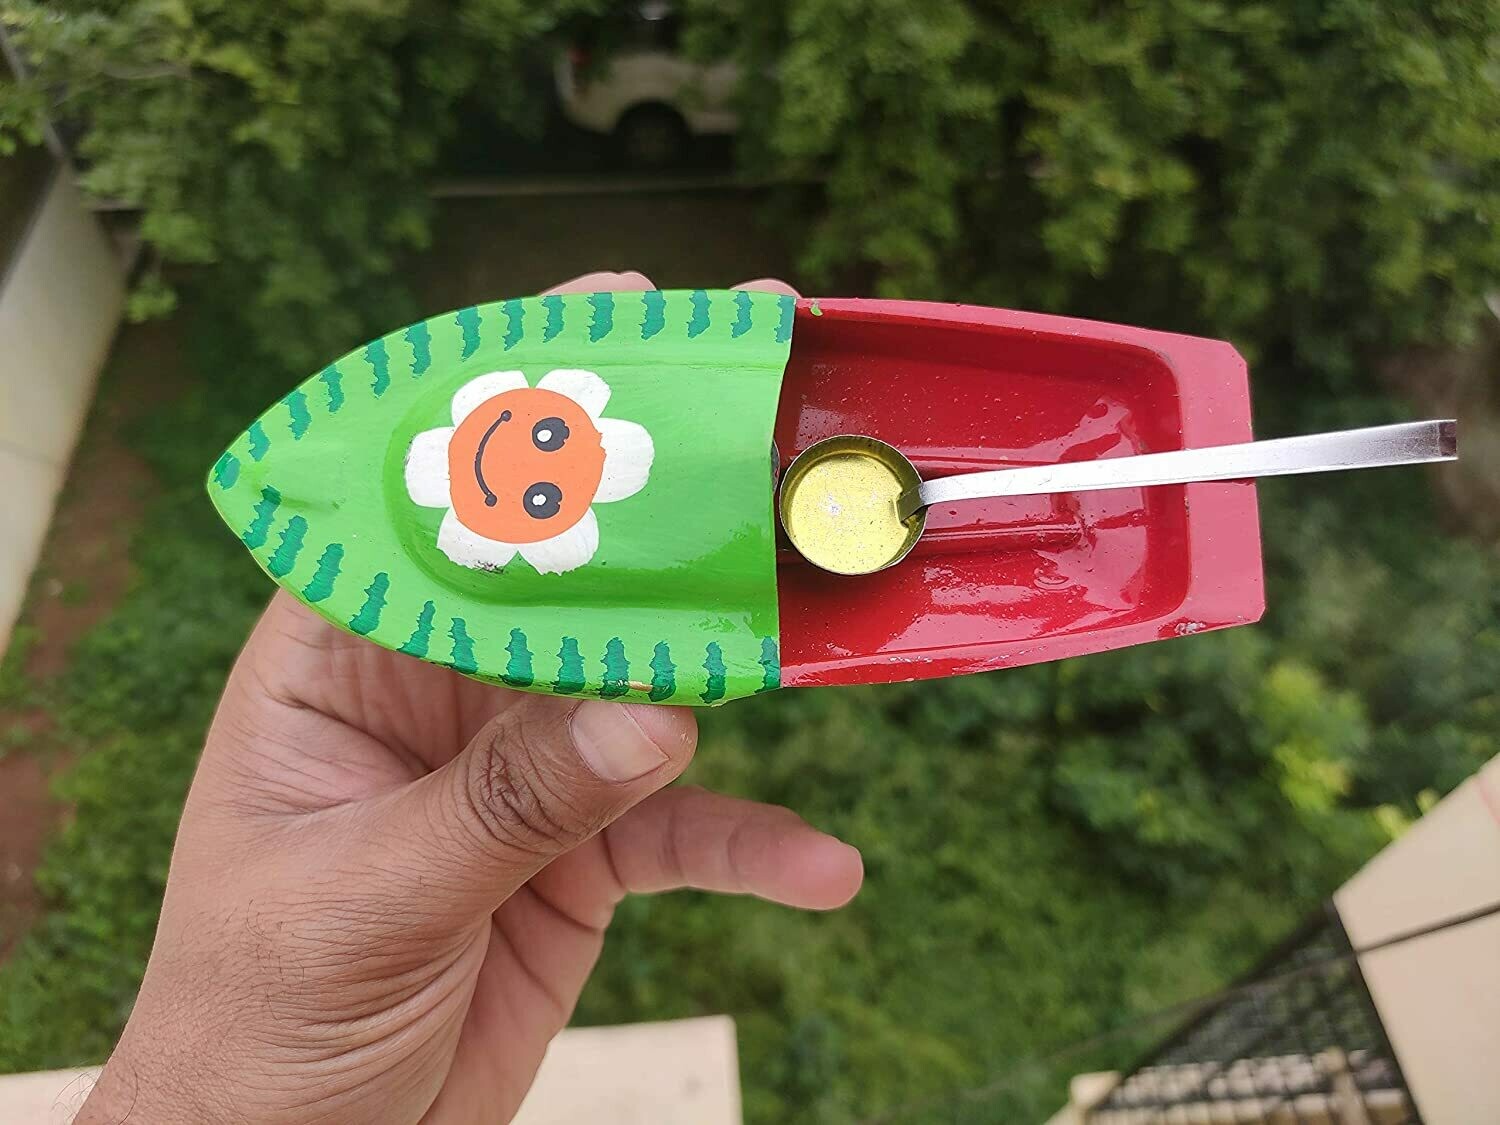 Fun Tin Toy Boat Naav Pop Put Candle Steam Powered Fuel Flame With Dropper India 